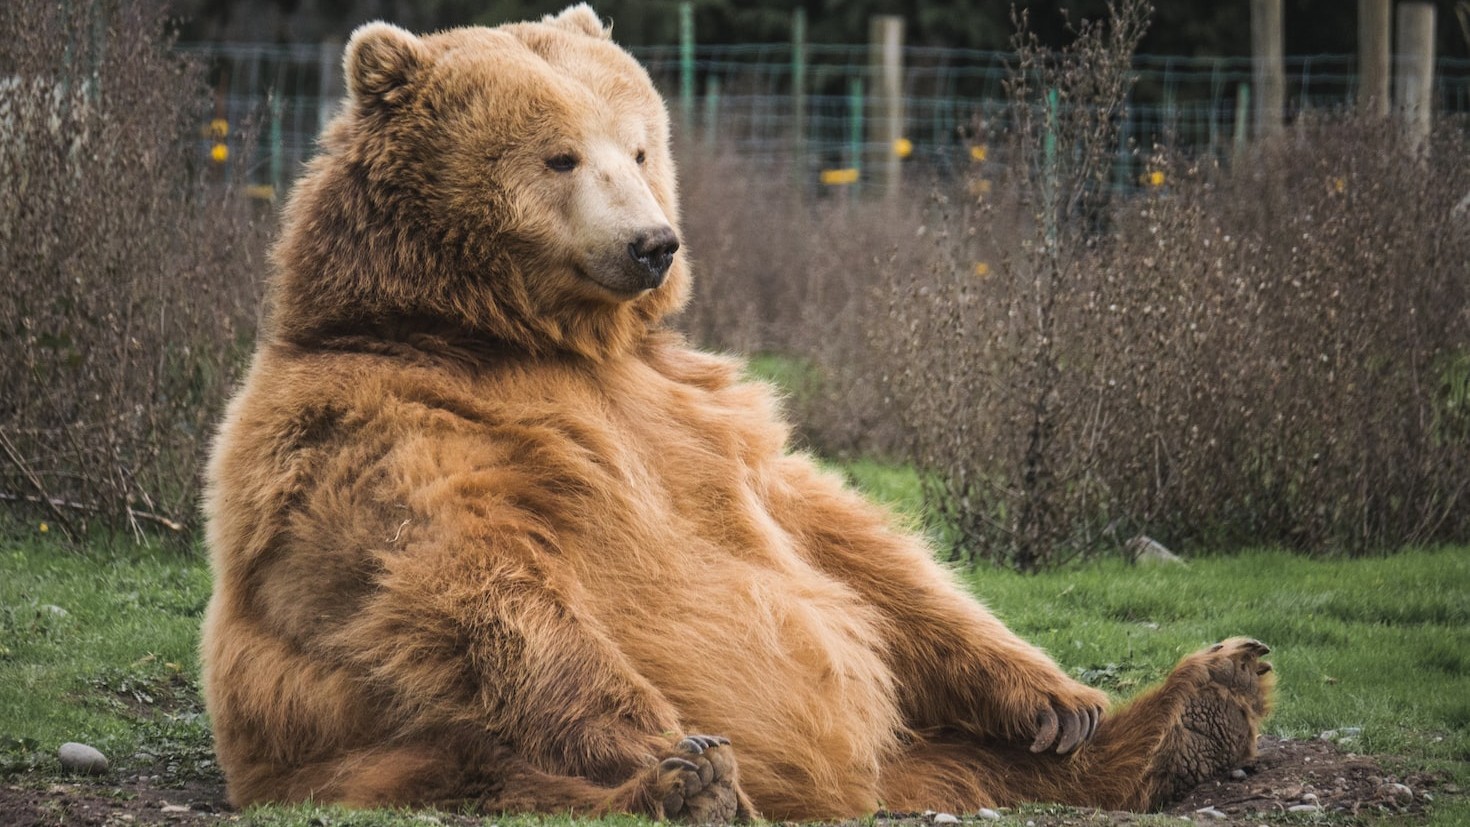 Hibernating bears may hold the secret to curing diabetes